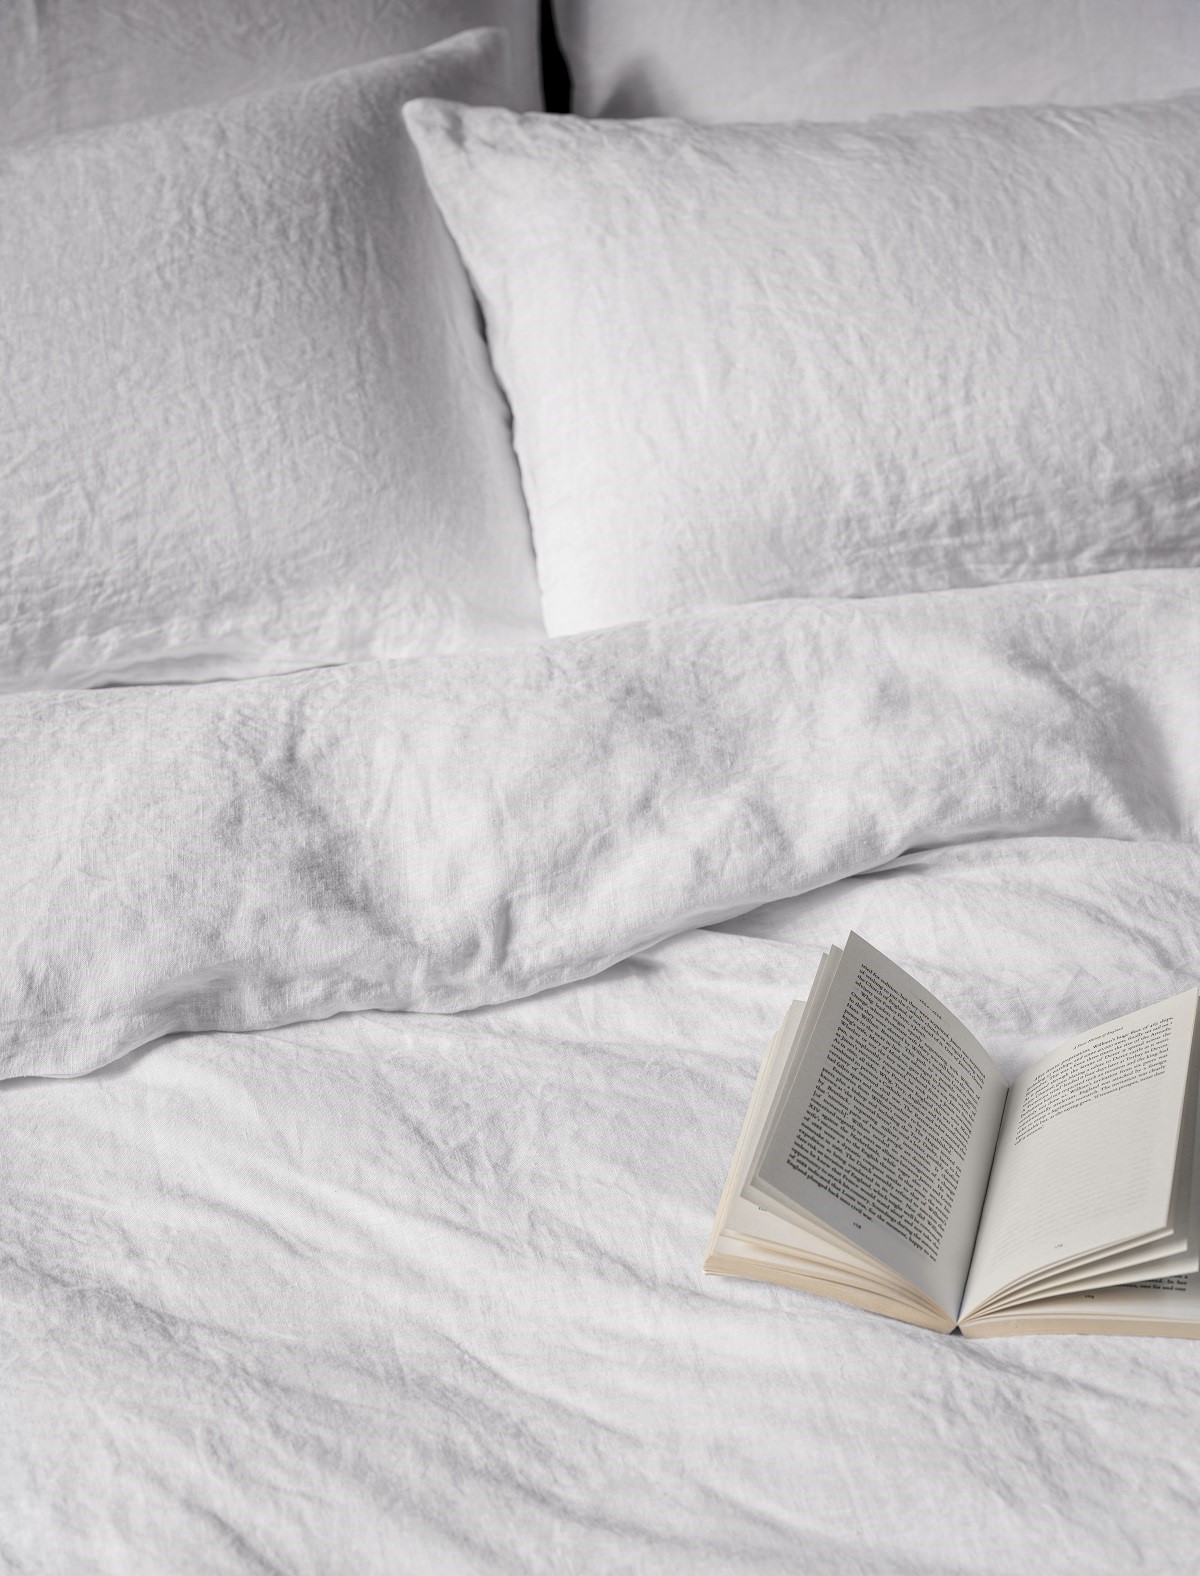 detail of washed organic linen sheets rumpled on bed with open book